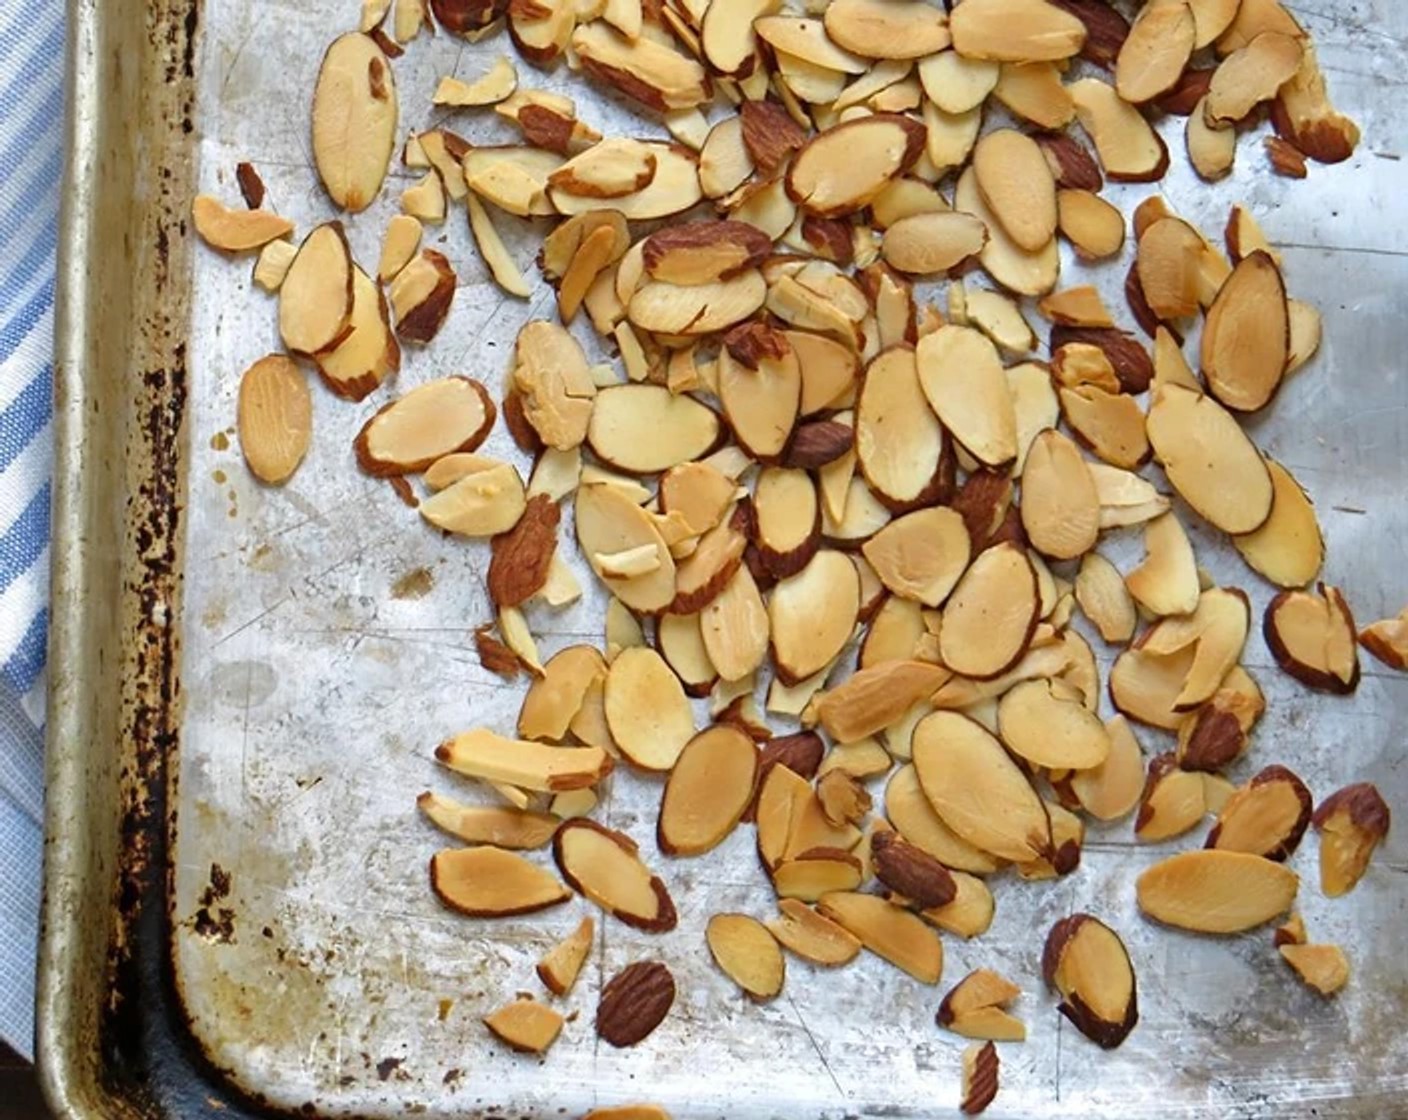 step 2 Lay the Sliced Almonds (1/4 cup) in a single layer on a sheet pan.